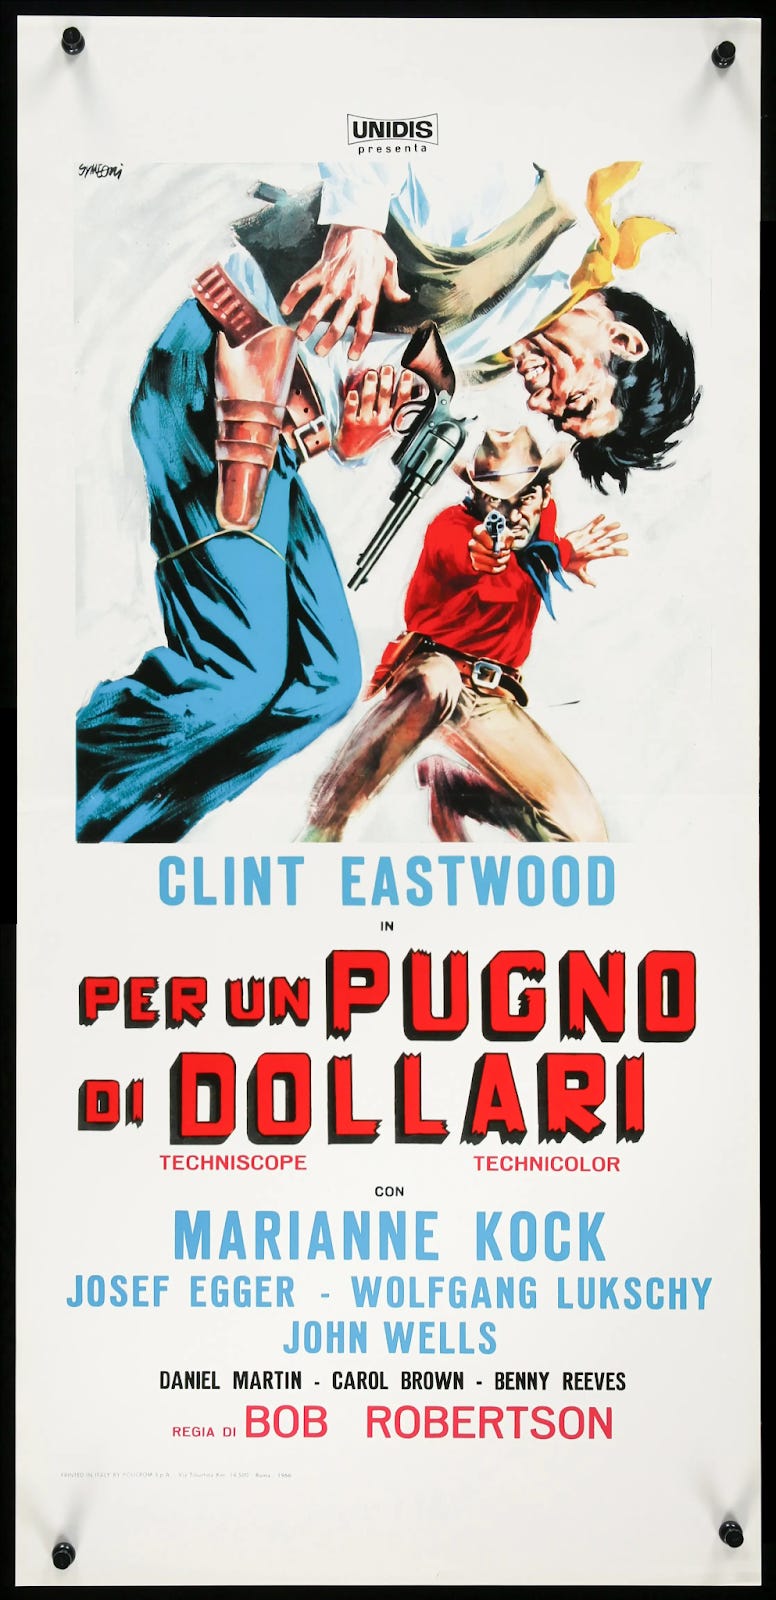 The original film poster for Sergio Leone's "A Fistful of Dollars"